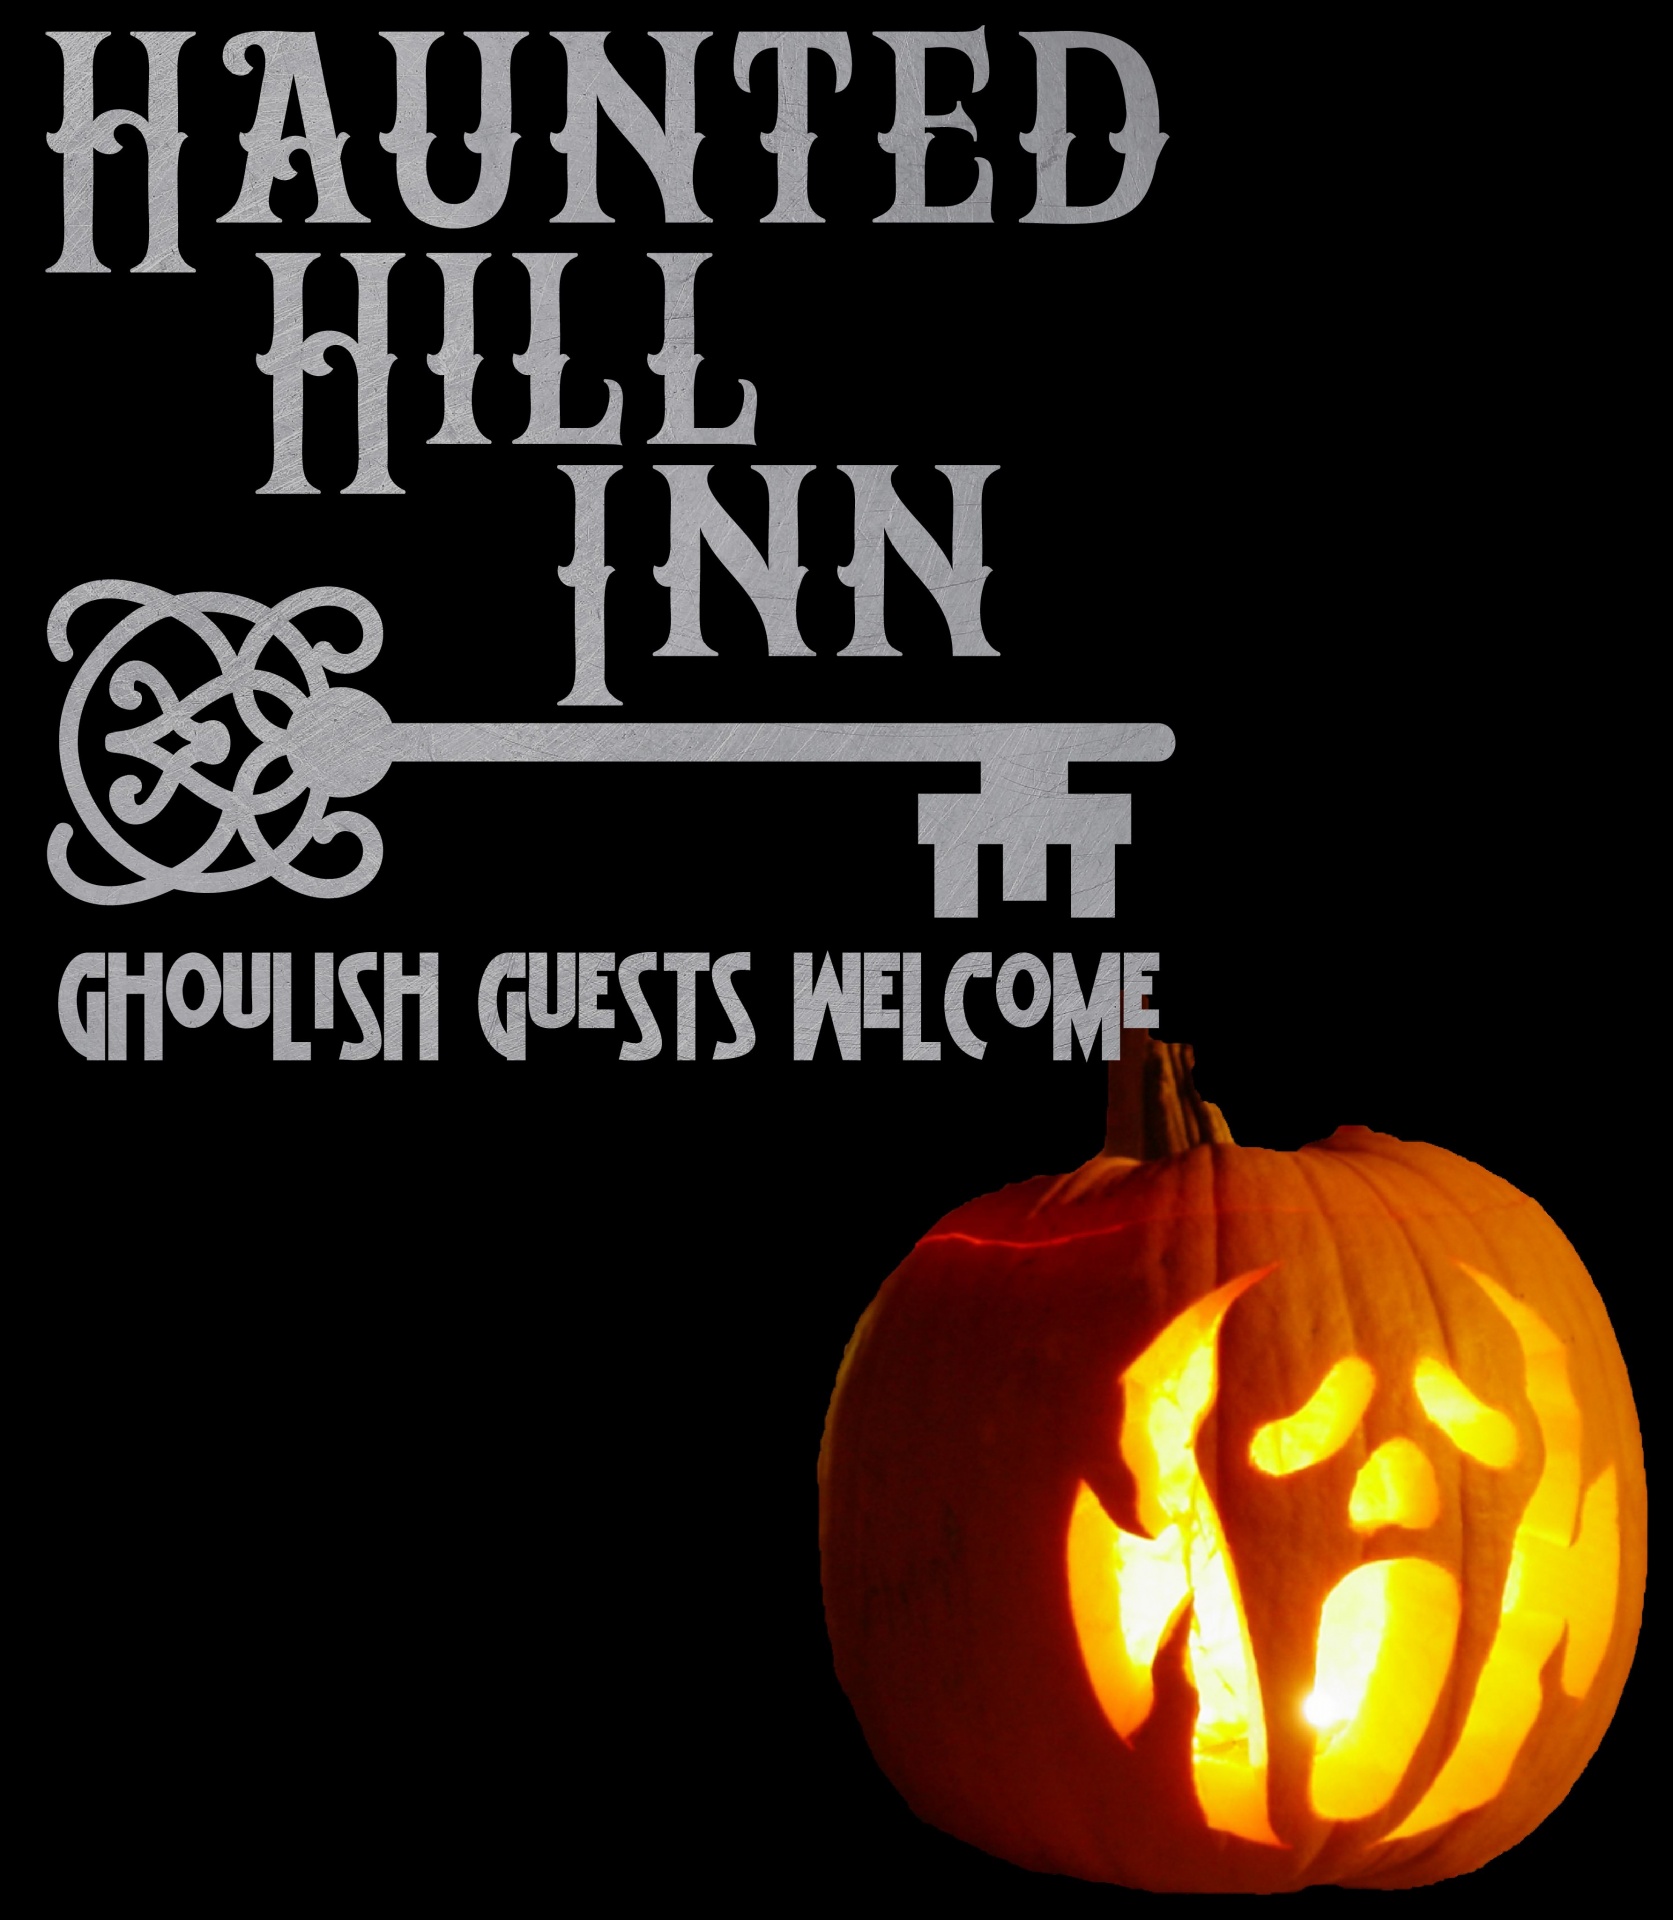 poster for Haunted Hill Inn where Ghoulish Guests are Welcome